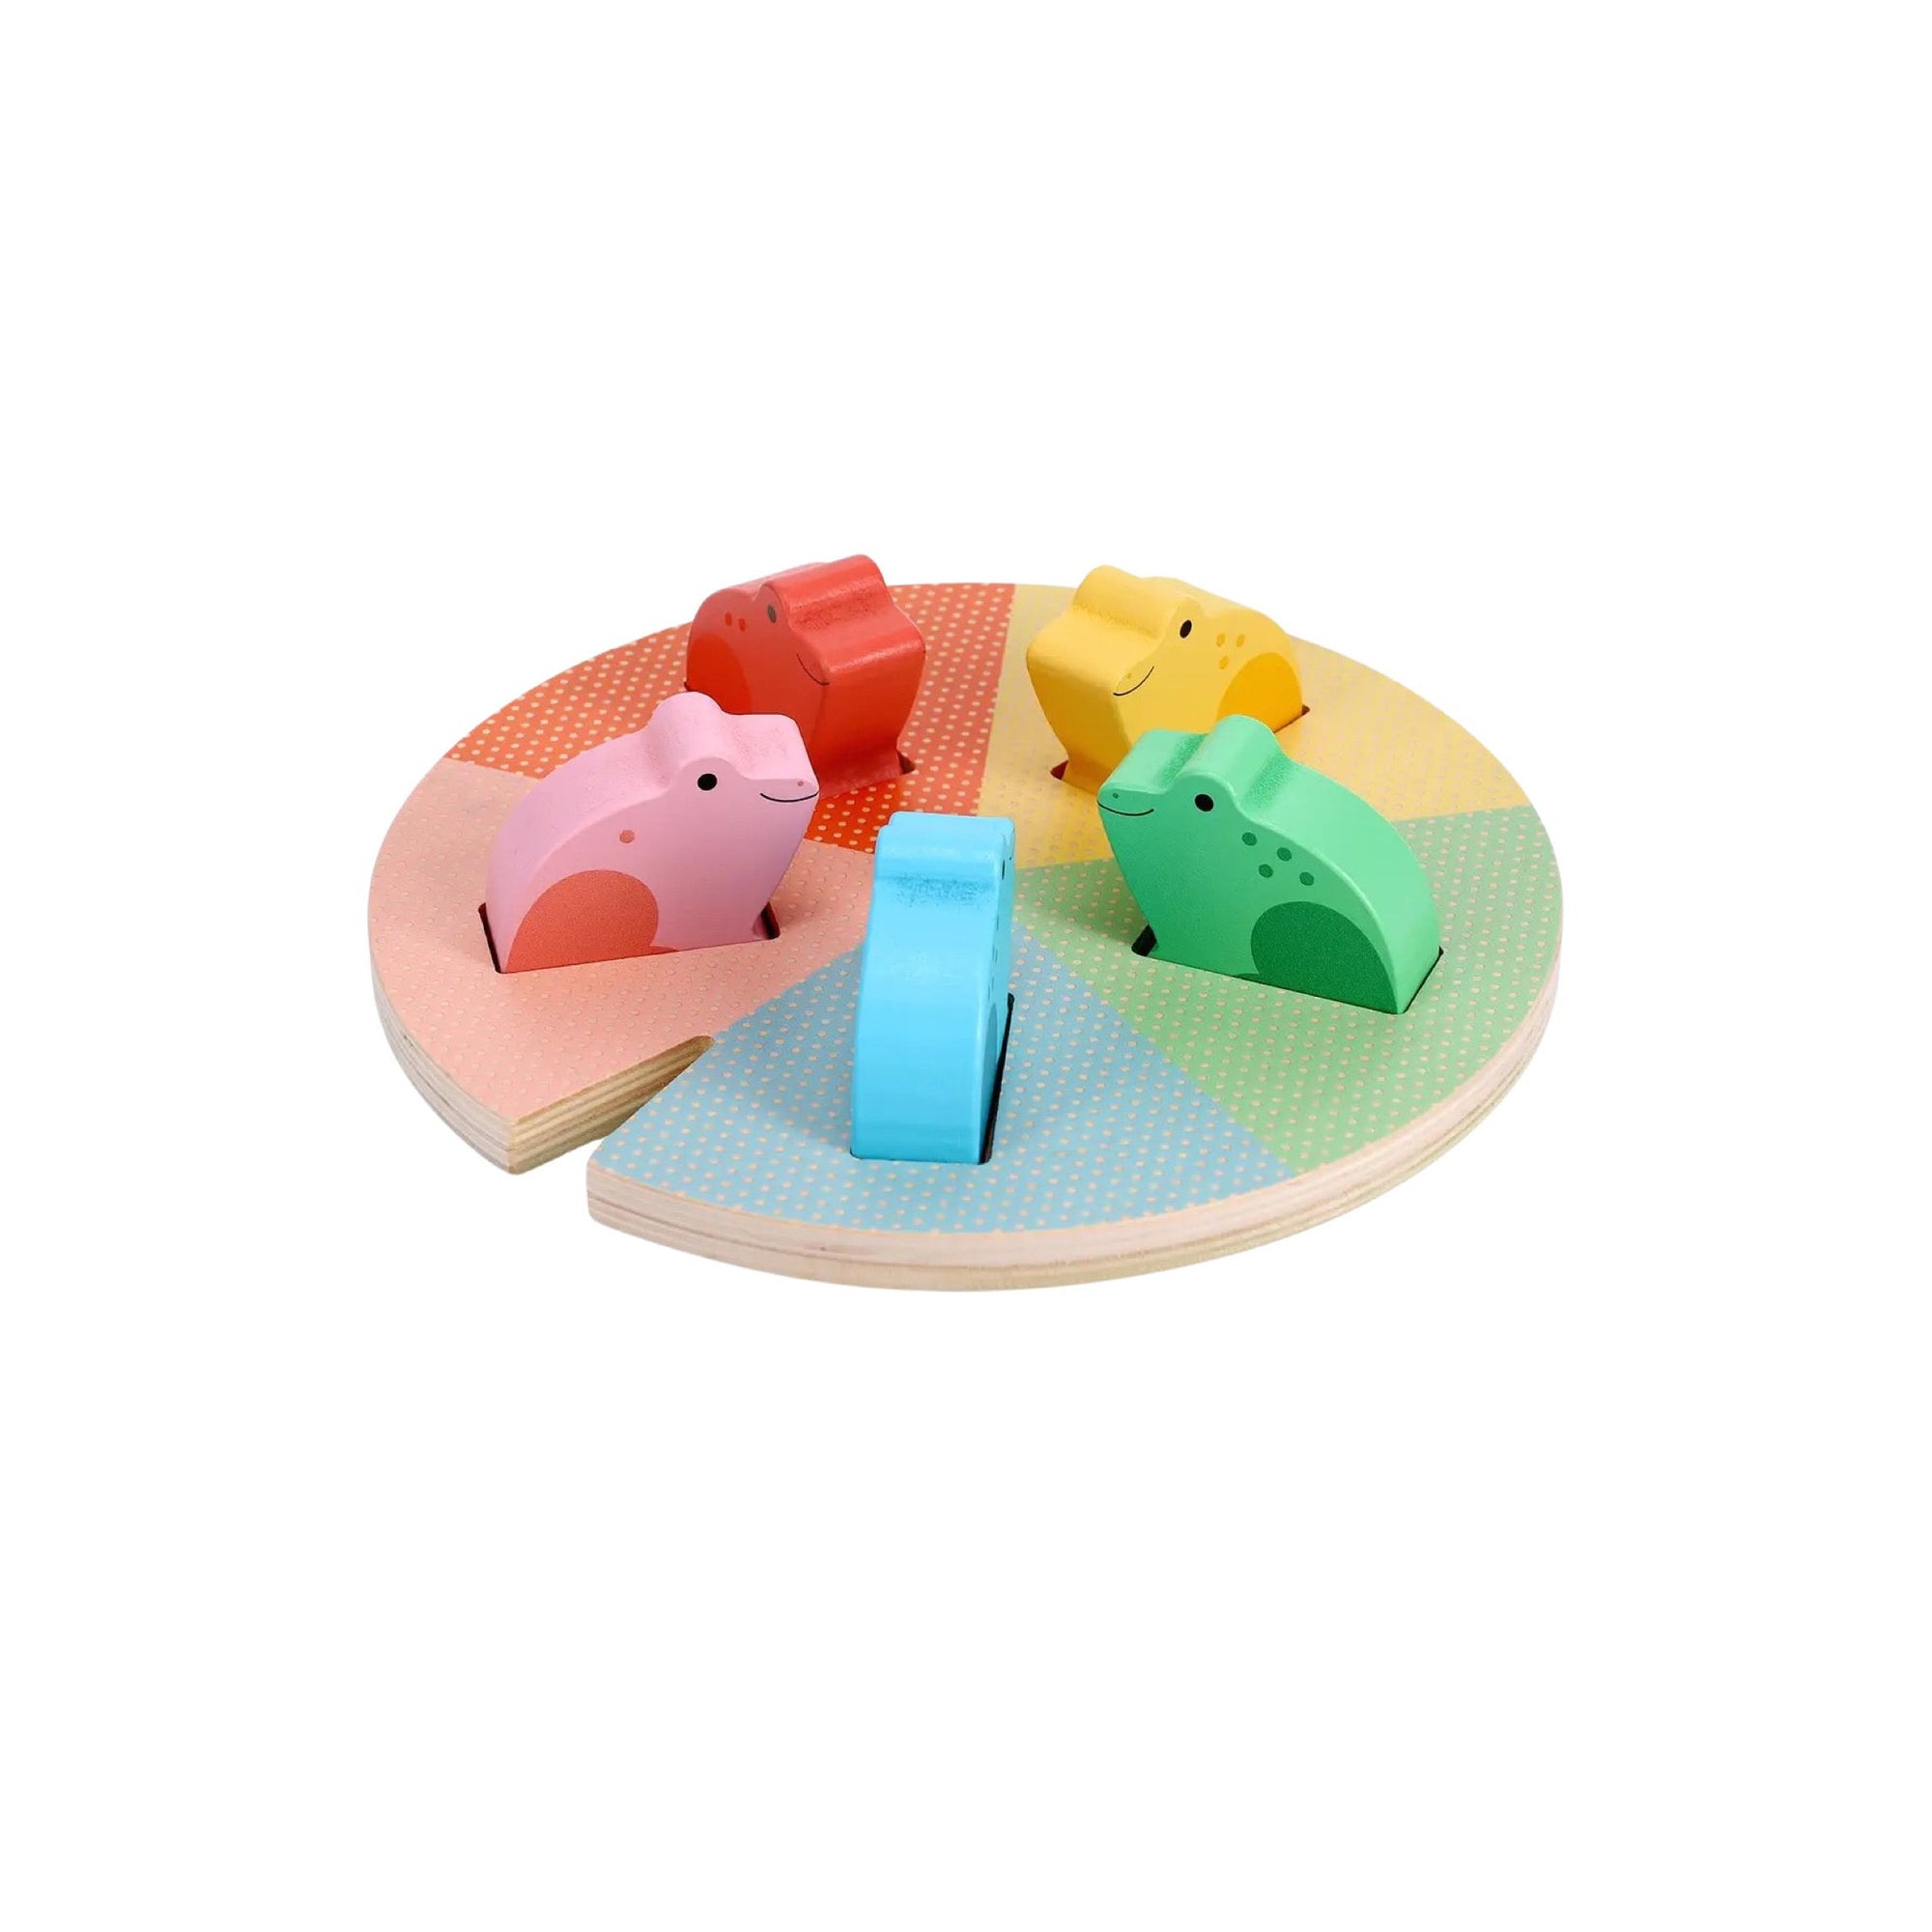 Wooden Nursery Counting Puzzle